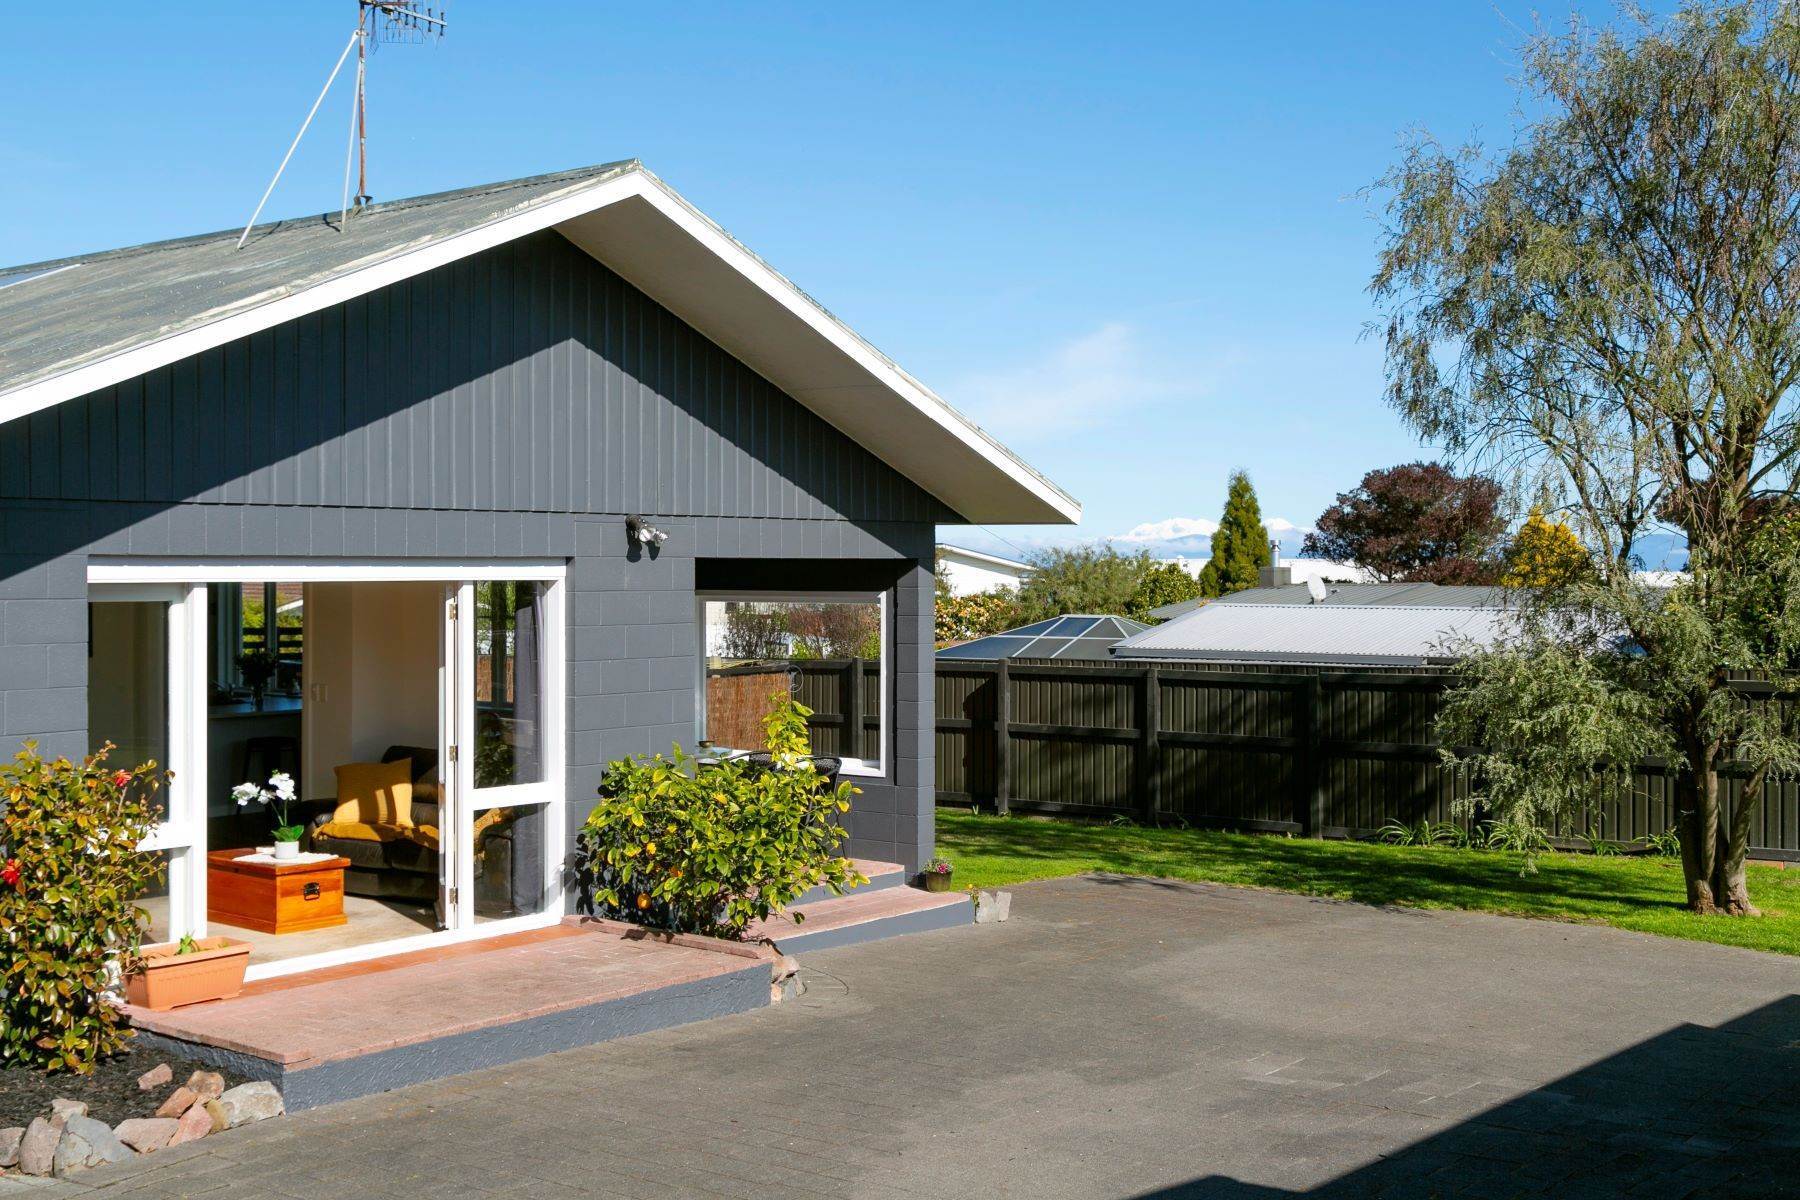 Single Family Homes for Sale at 16A Huia Street, Taupo, Waikato 16a Huia Street Taupo, Waikato 3330 New Zealand